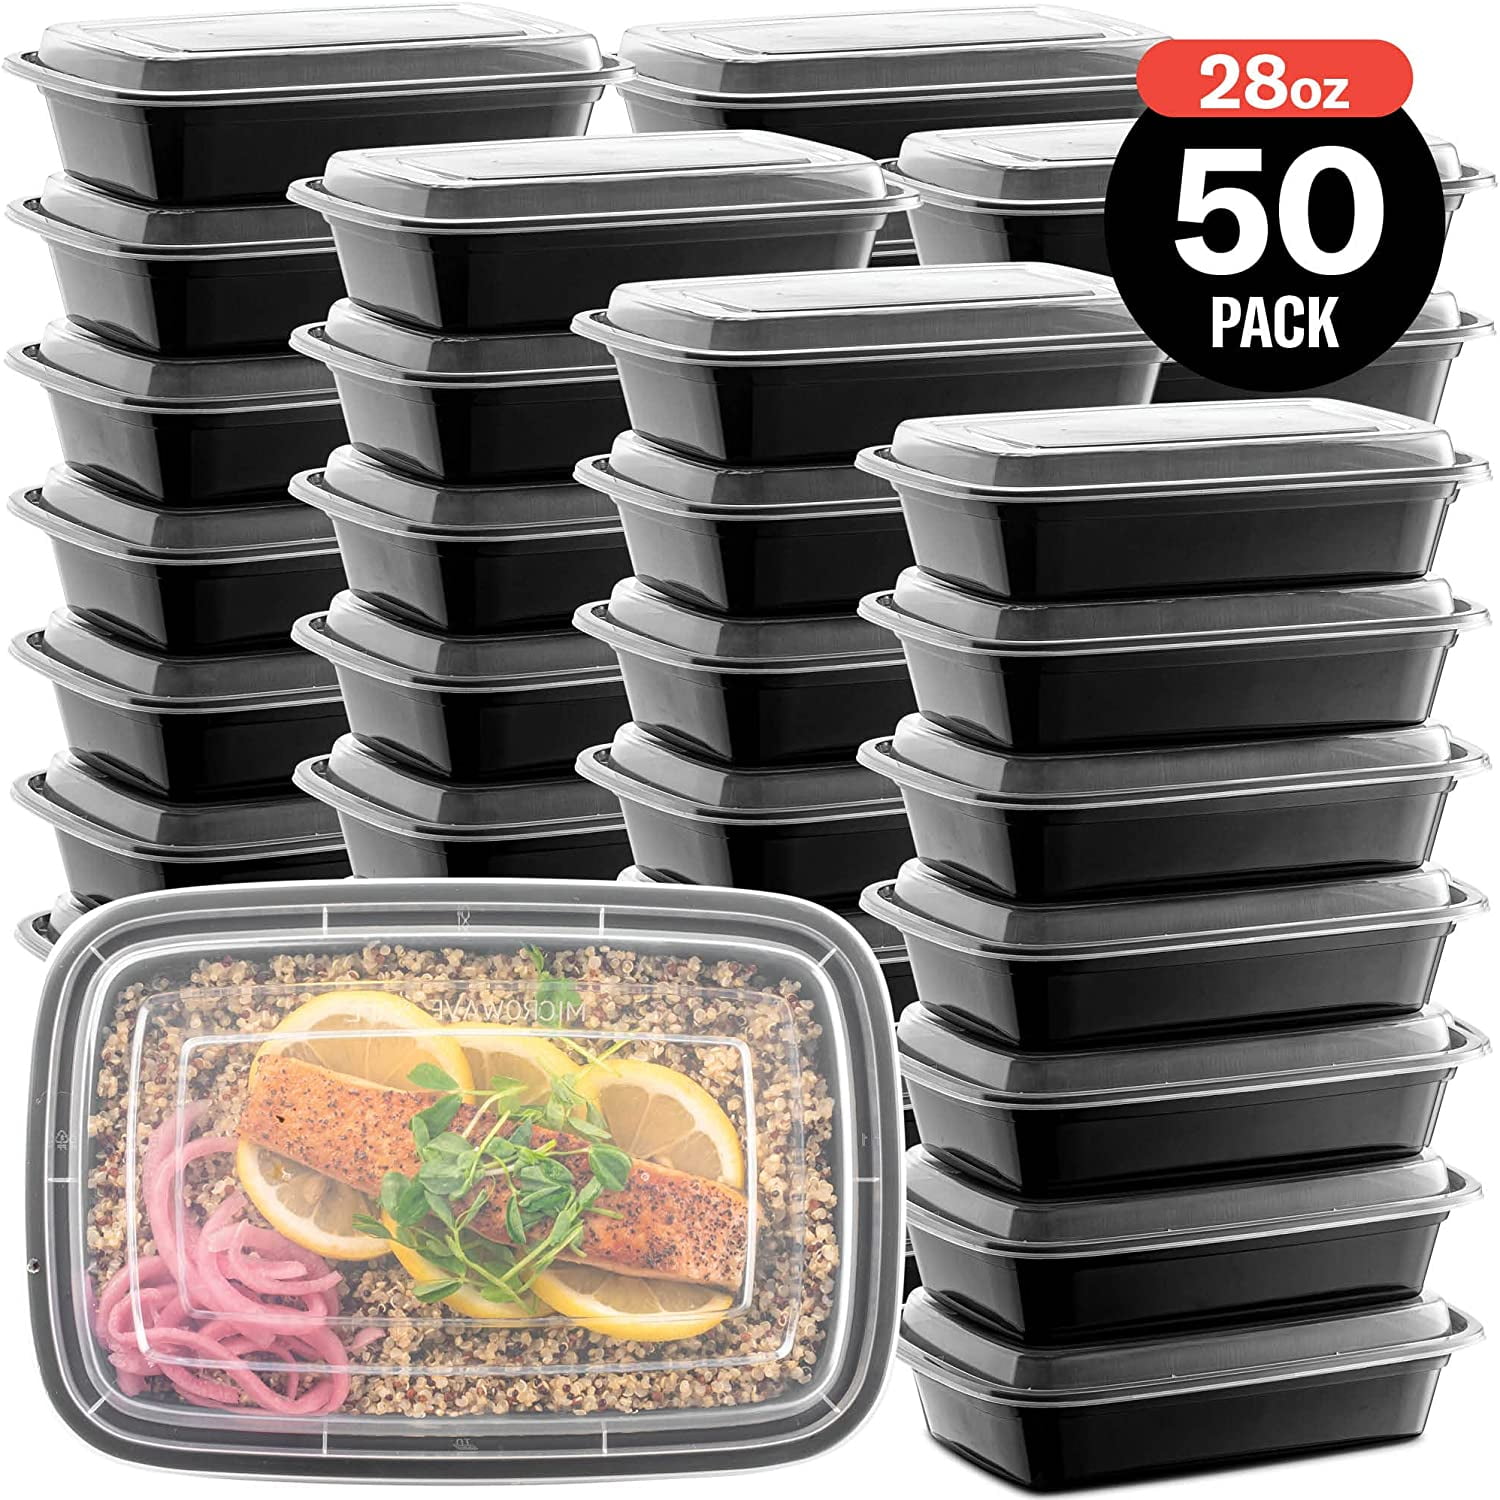 44 PCS Food Storage Containers with Lids Airtight, BPA Free Plastic Meal  Prep Containers Reusable, Microwave/Freezer/Dishwasher Safe Clear Leakproof